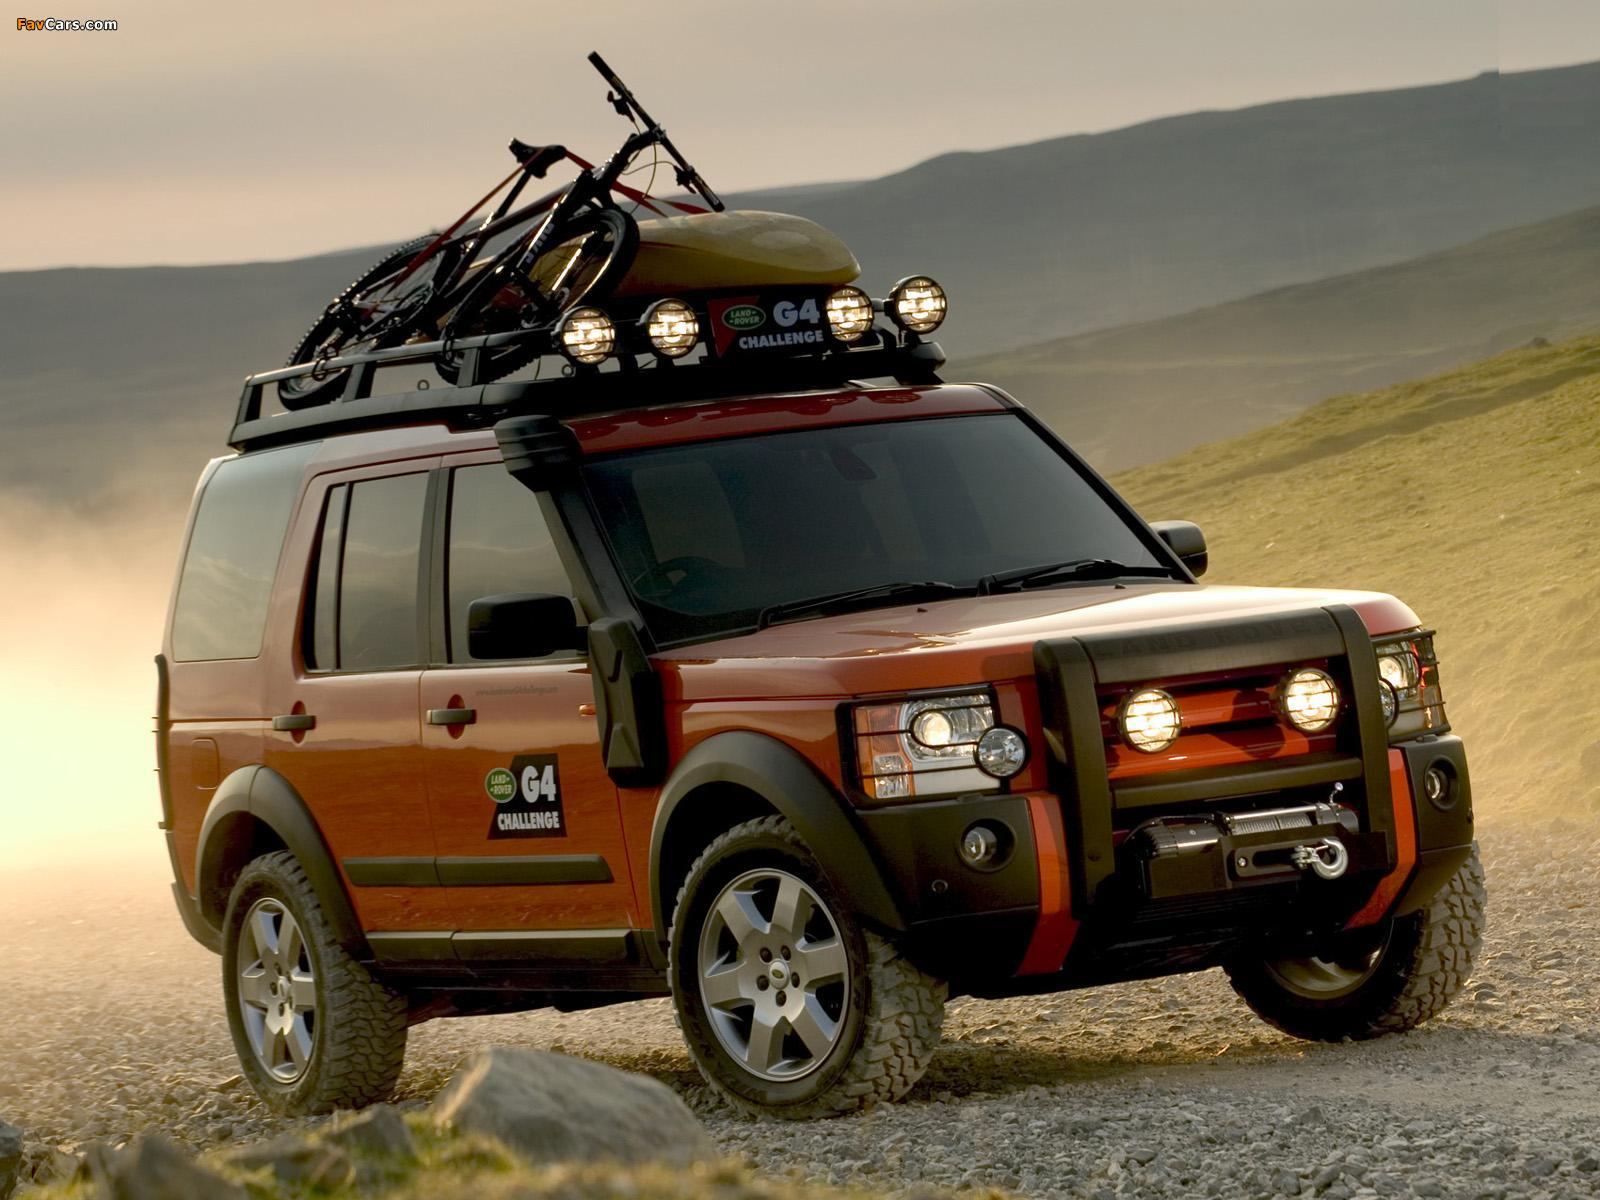 Land Rover Discovery 3 G4 Edition Wallpapers - Land Rover Discovery 3 G4 Edition - HD Wallpaper 